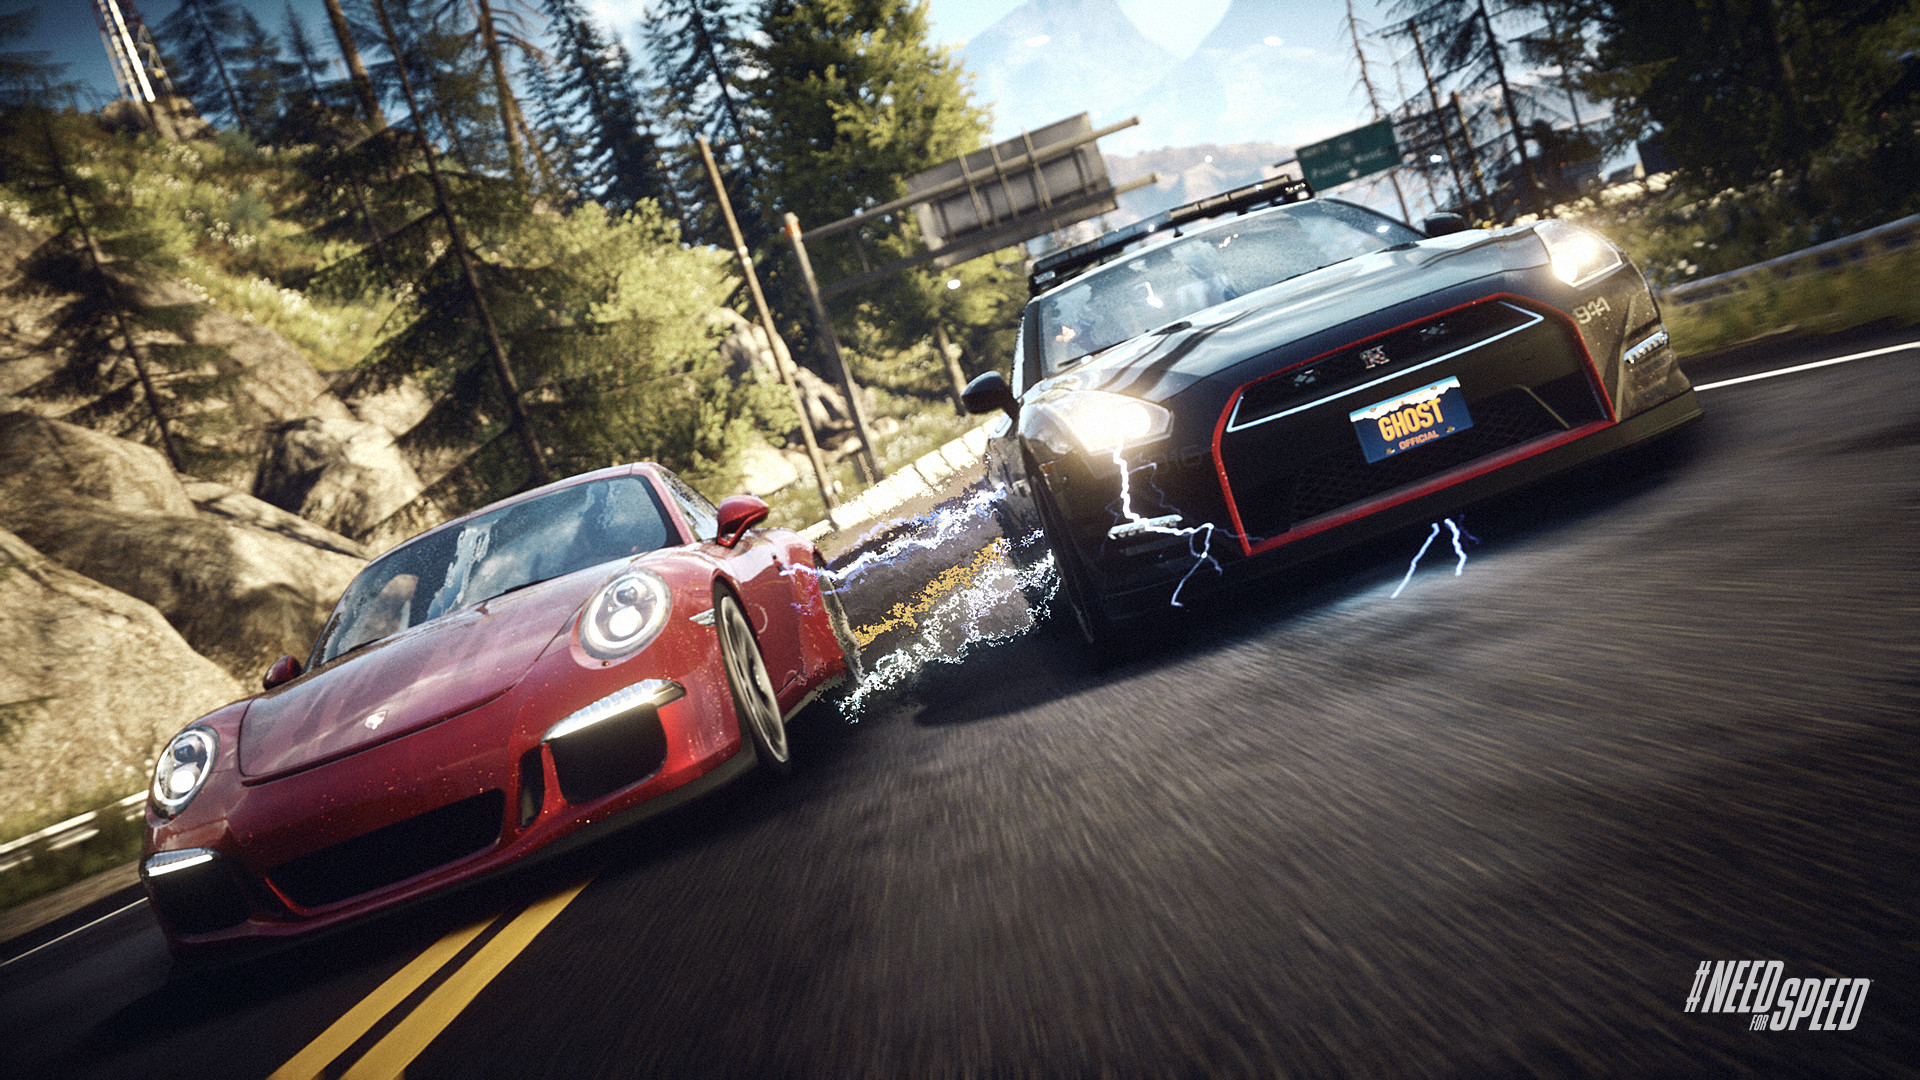 Electronic Arts Need for Speed: Rivals Complete Edition (PC)